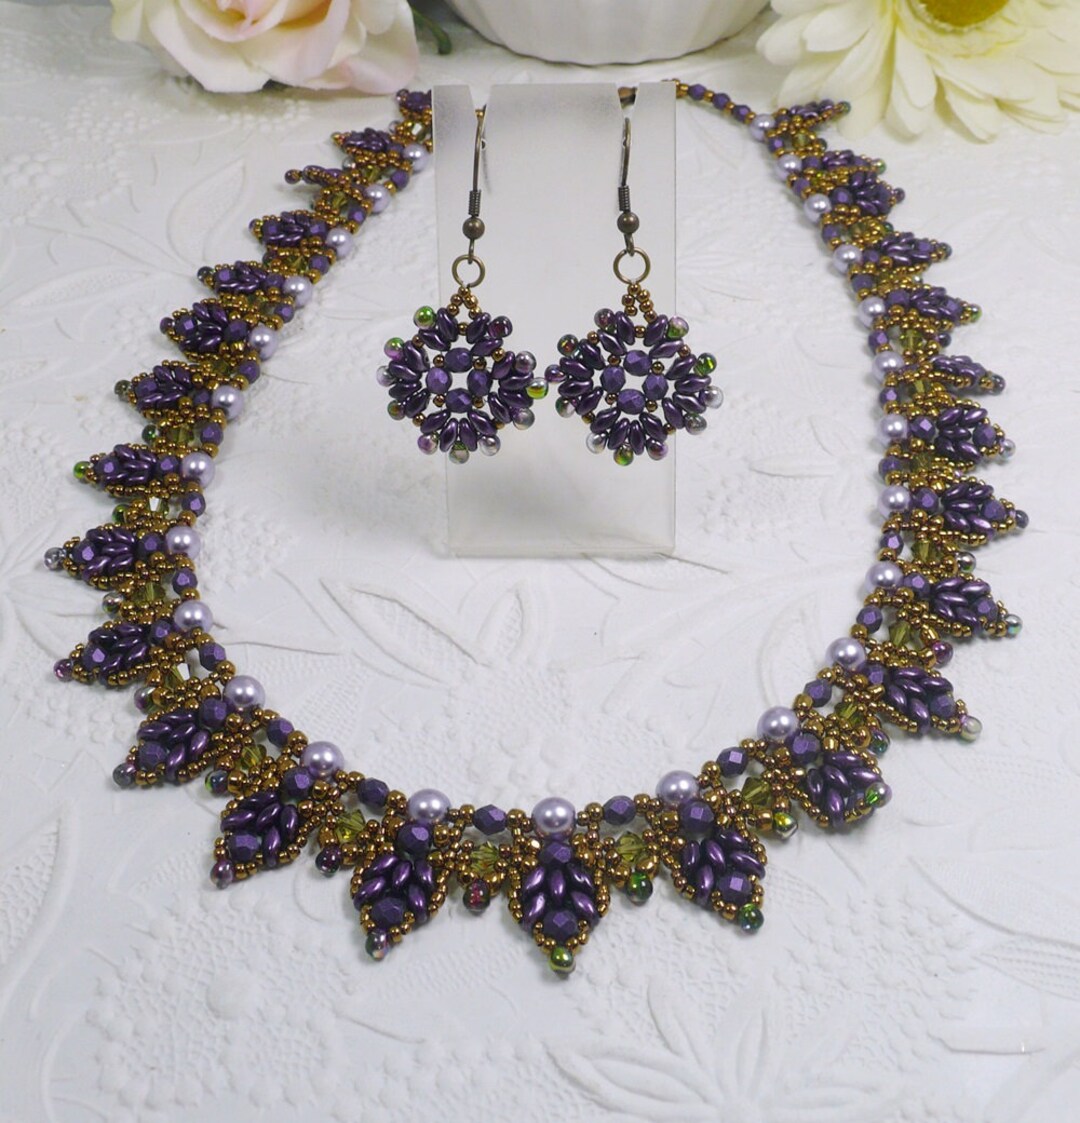 Woven Necklace and Earrings Set in Purple Vintage Inspired - Etsy